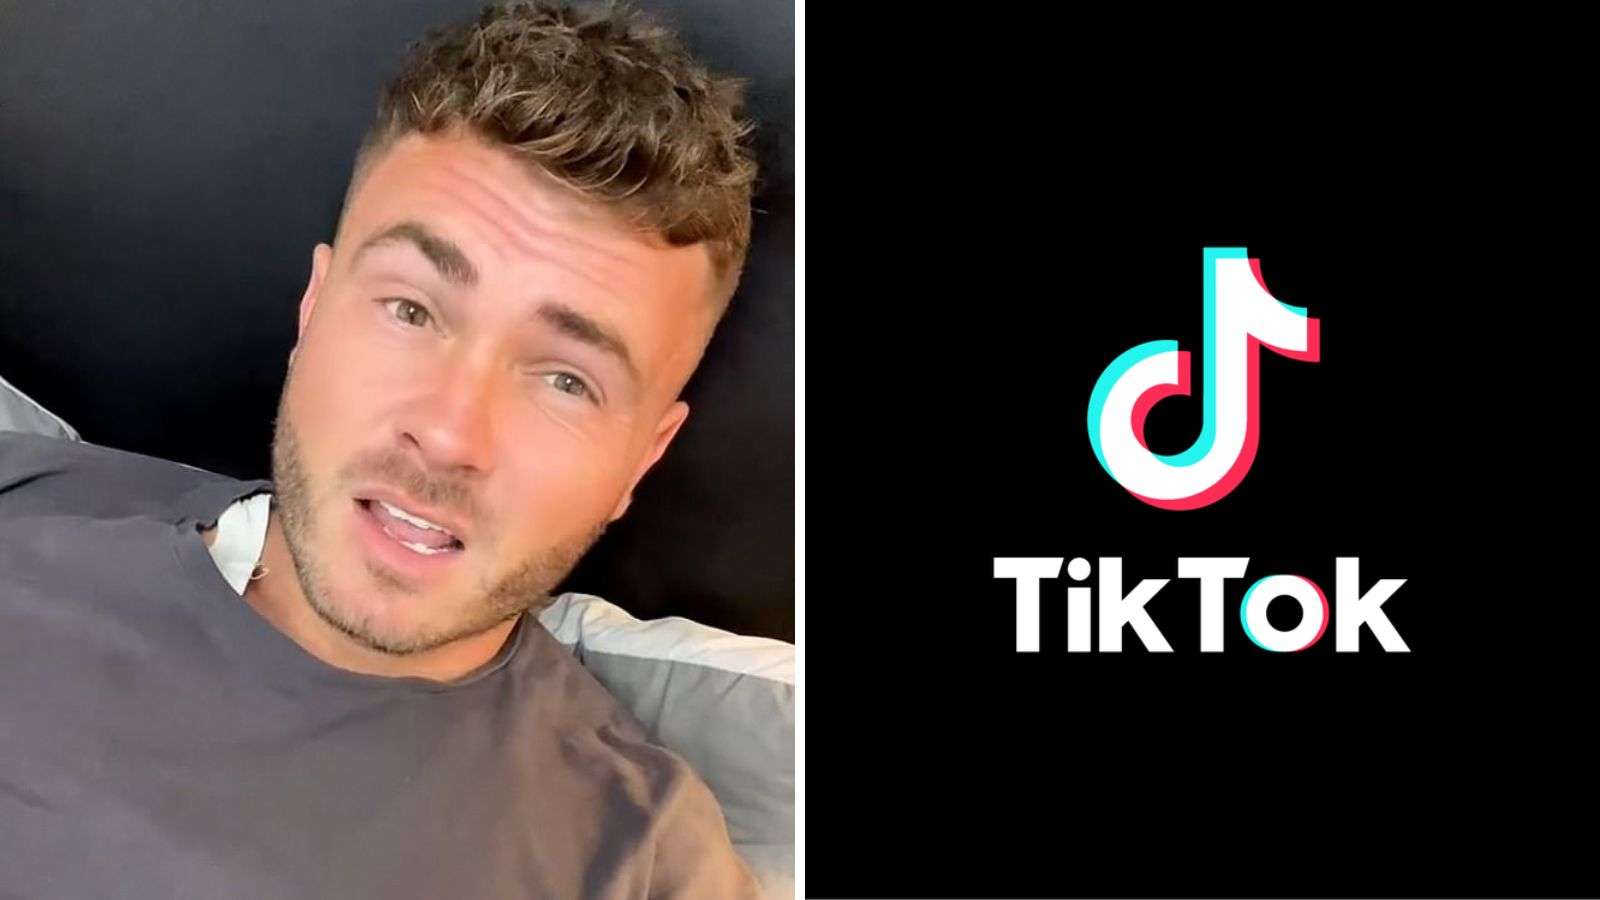 Man claiming to be the “hot dad” on the school run gets humbled on TikTok